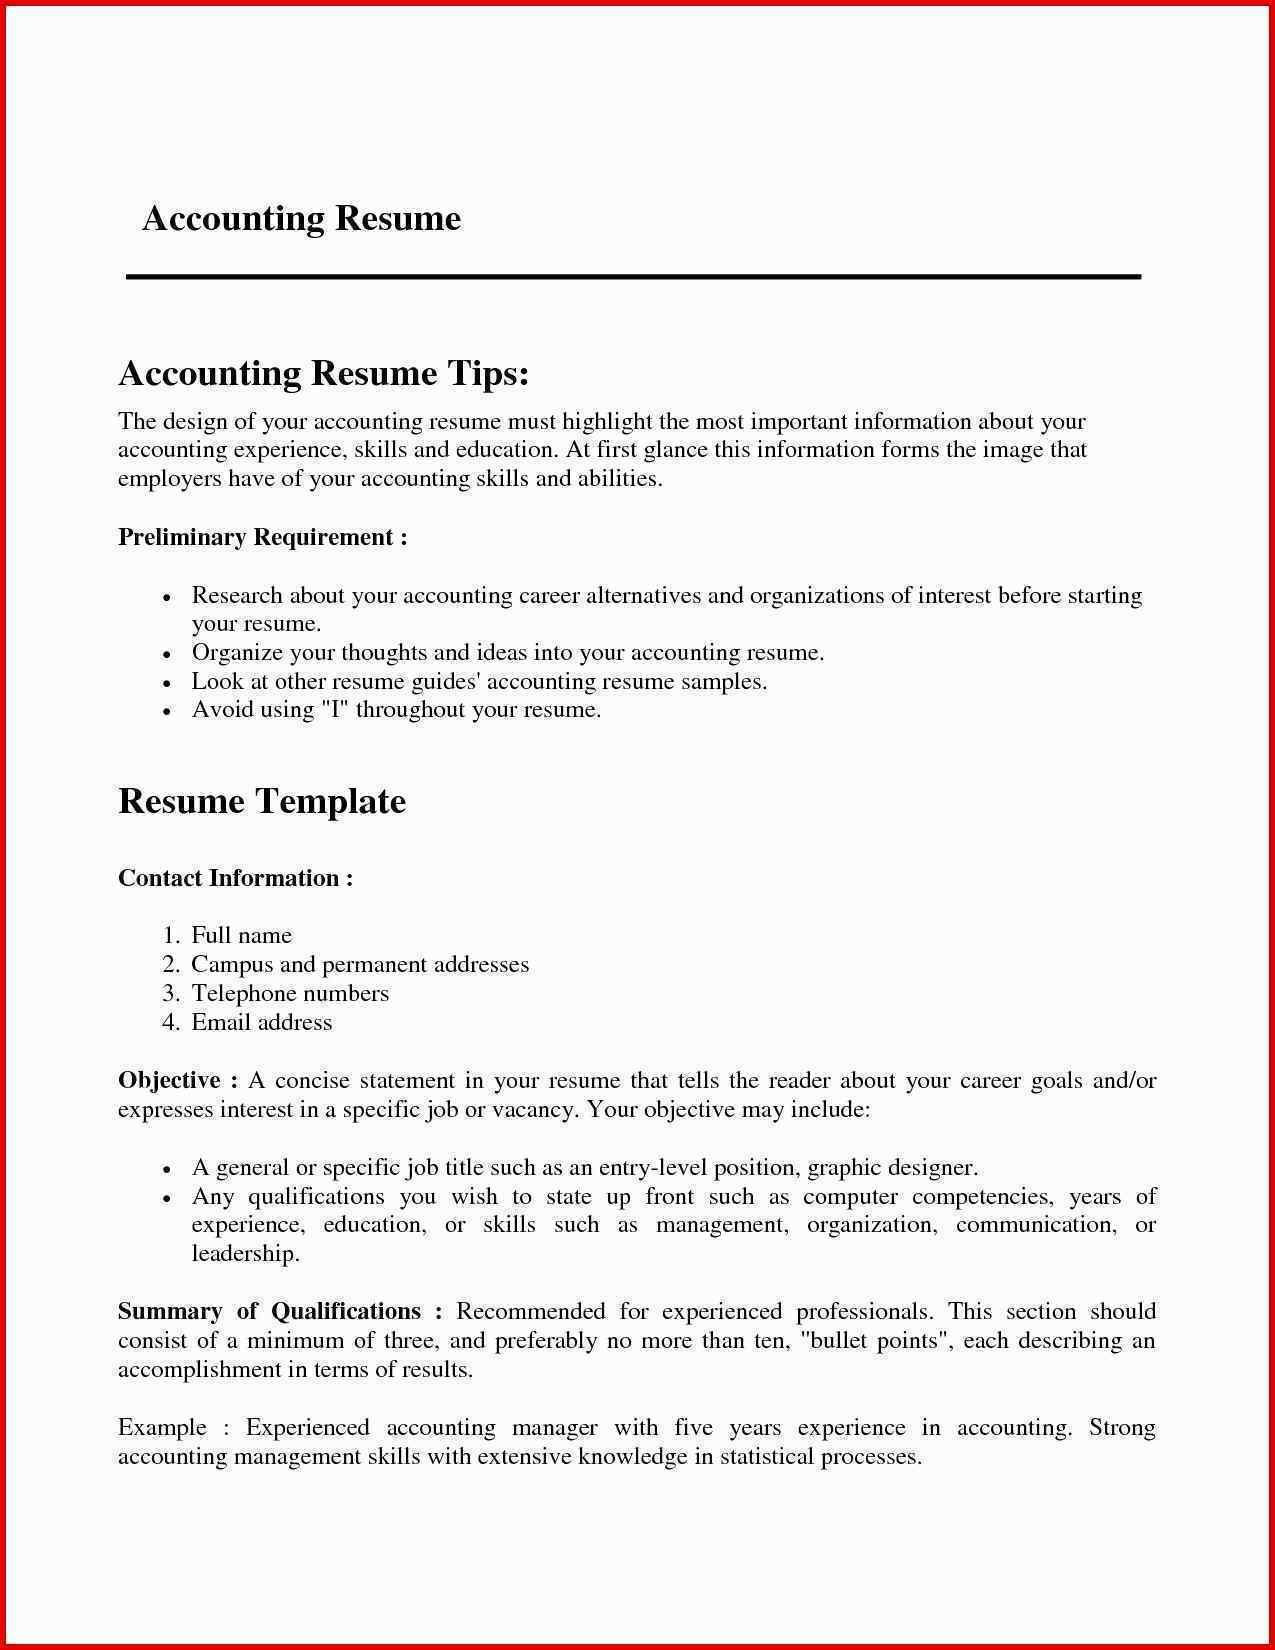 Resume Template for 3 Years Experience 3 Year Experience Resume format – Resume format Resume format …